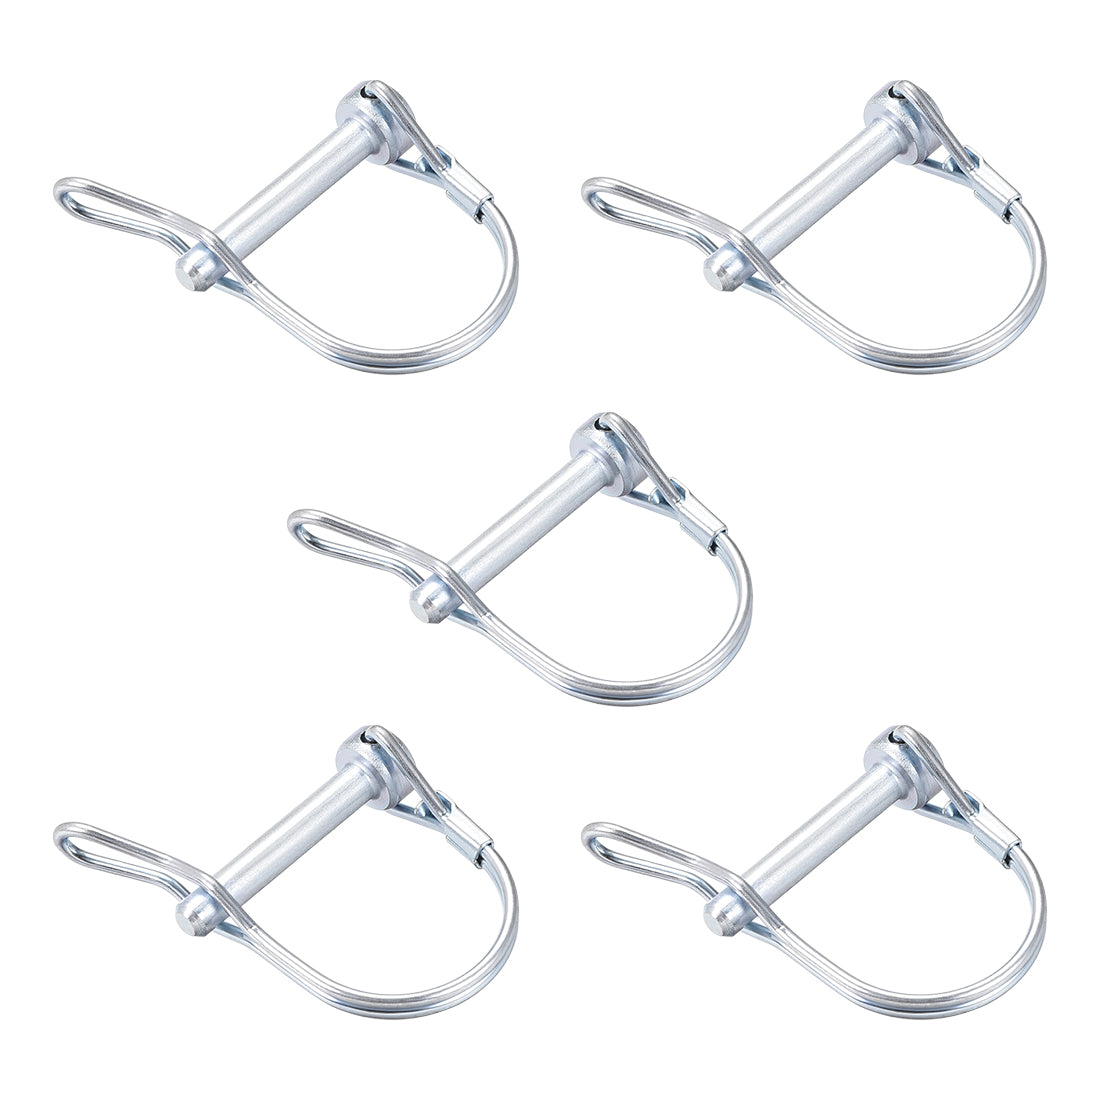 uxcell Uxcell Shaft Locking Pin w Ear 6mmx35mm Coupler Pin for Farm Trailers Lawn Arch 5Pcs